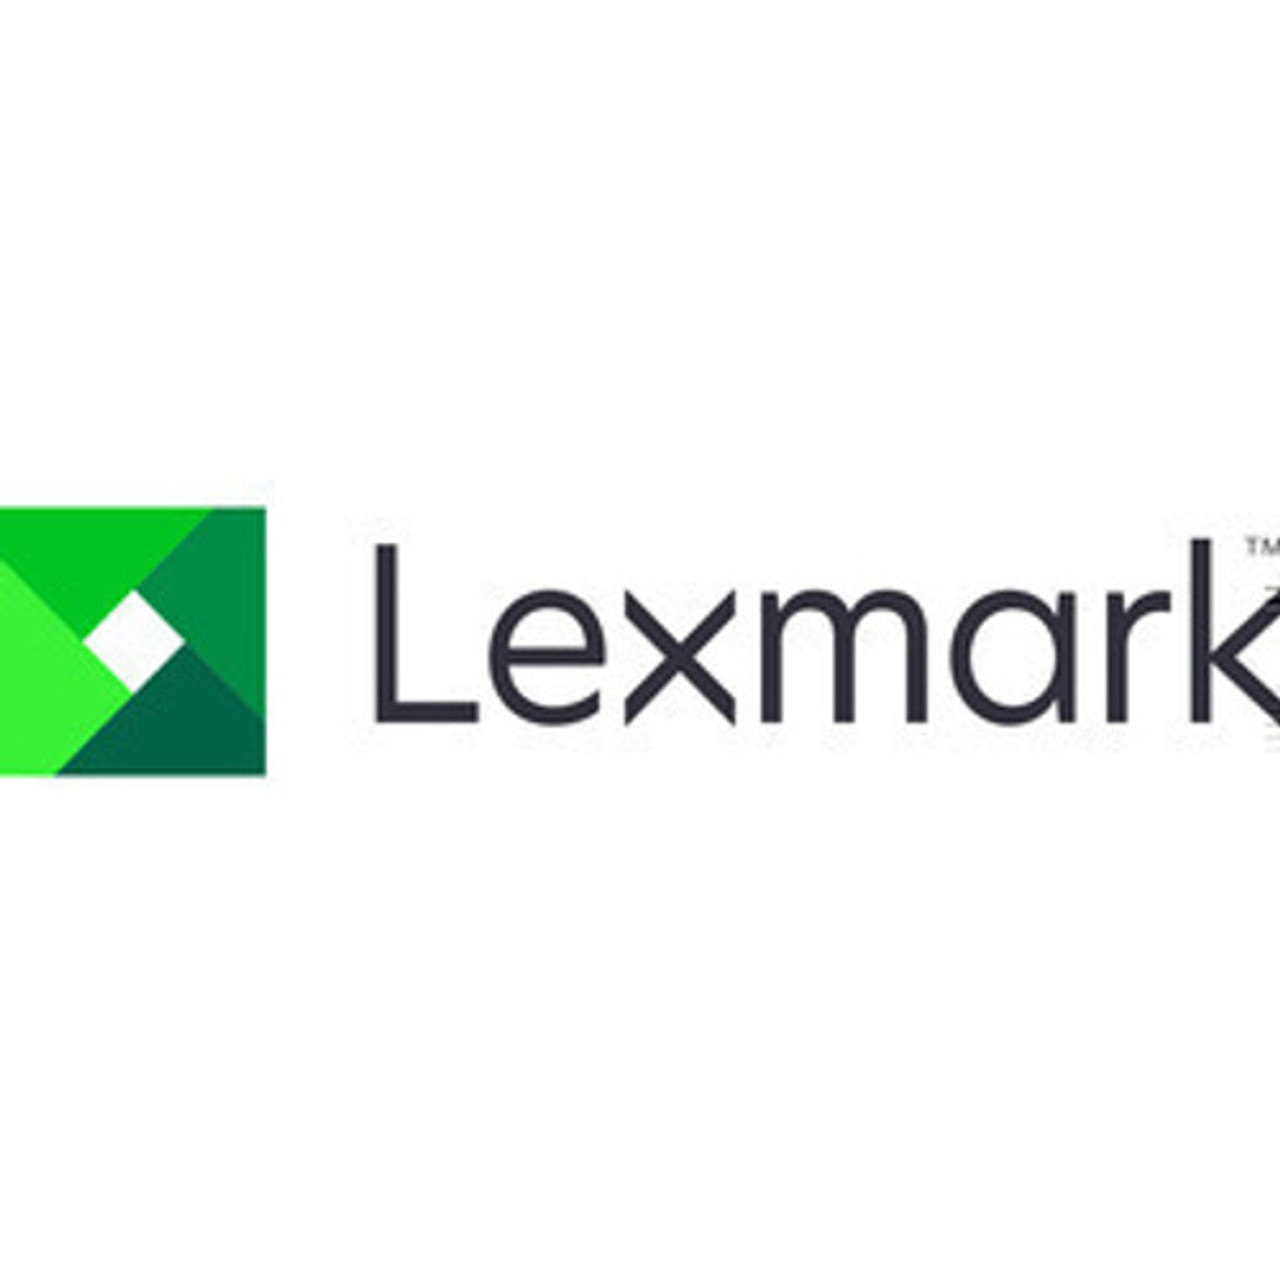 Lexmark 4061 T640 Top Fuser Cover - 40X0121